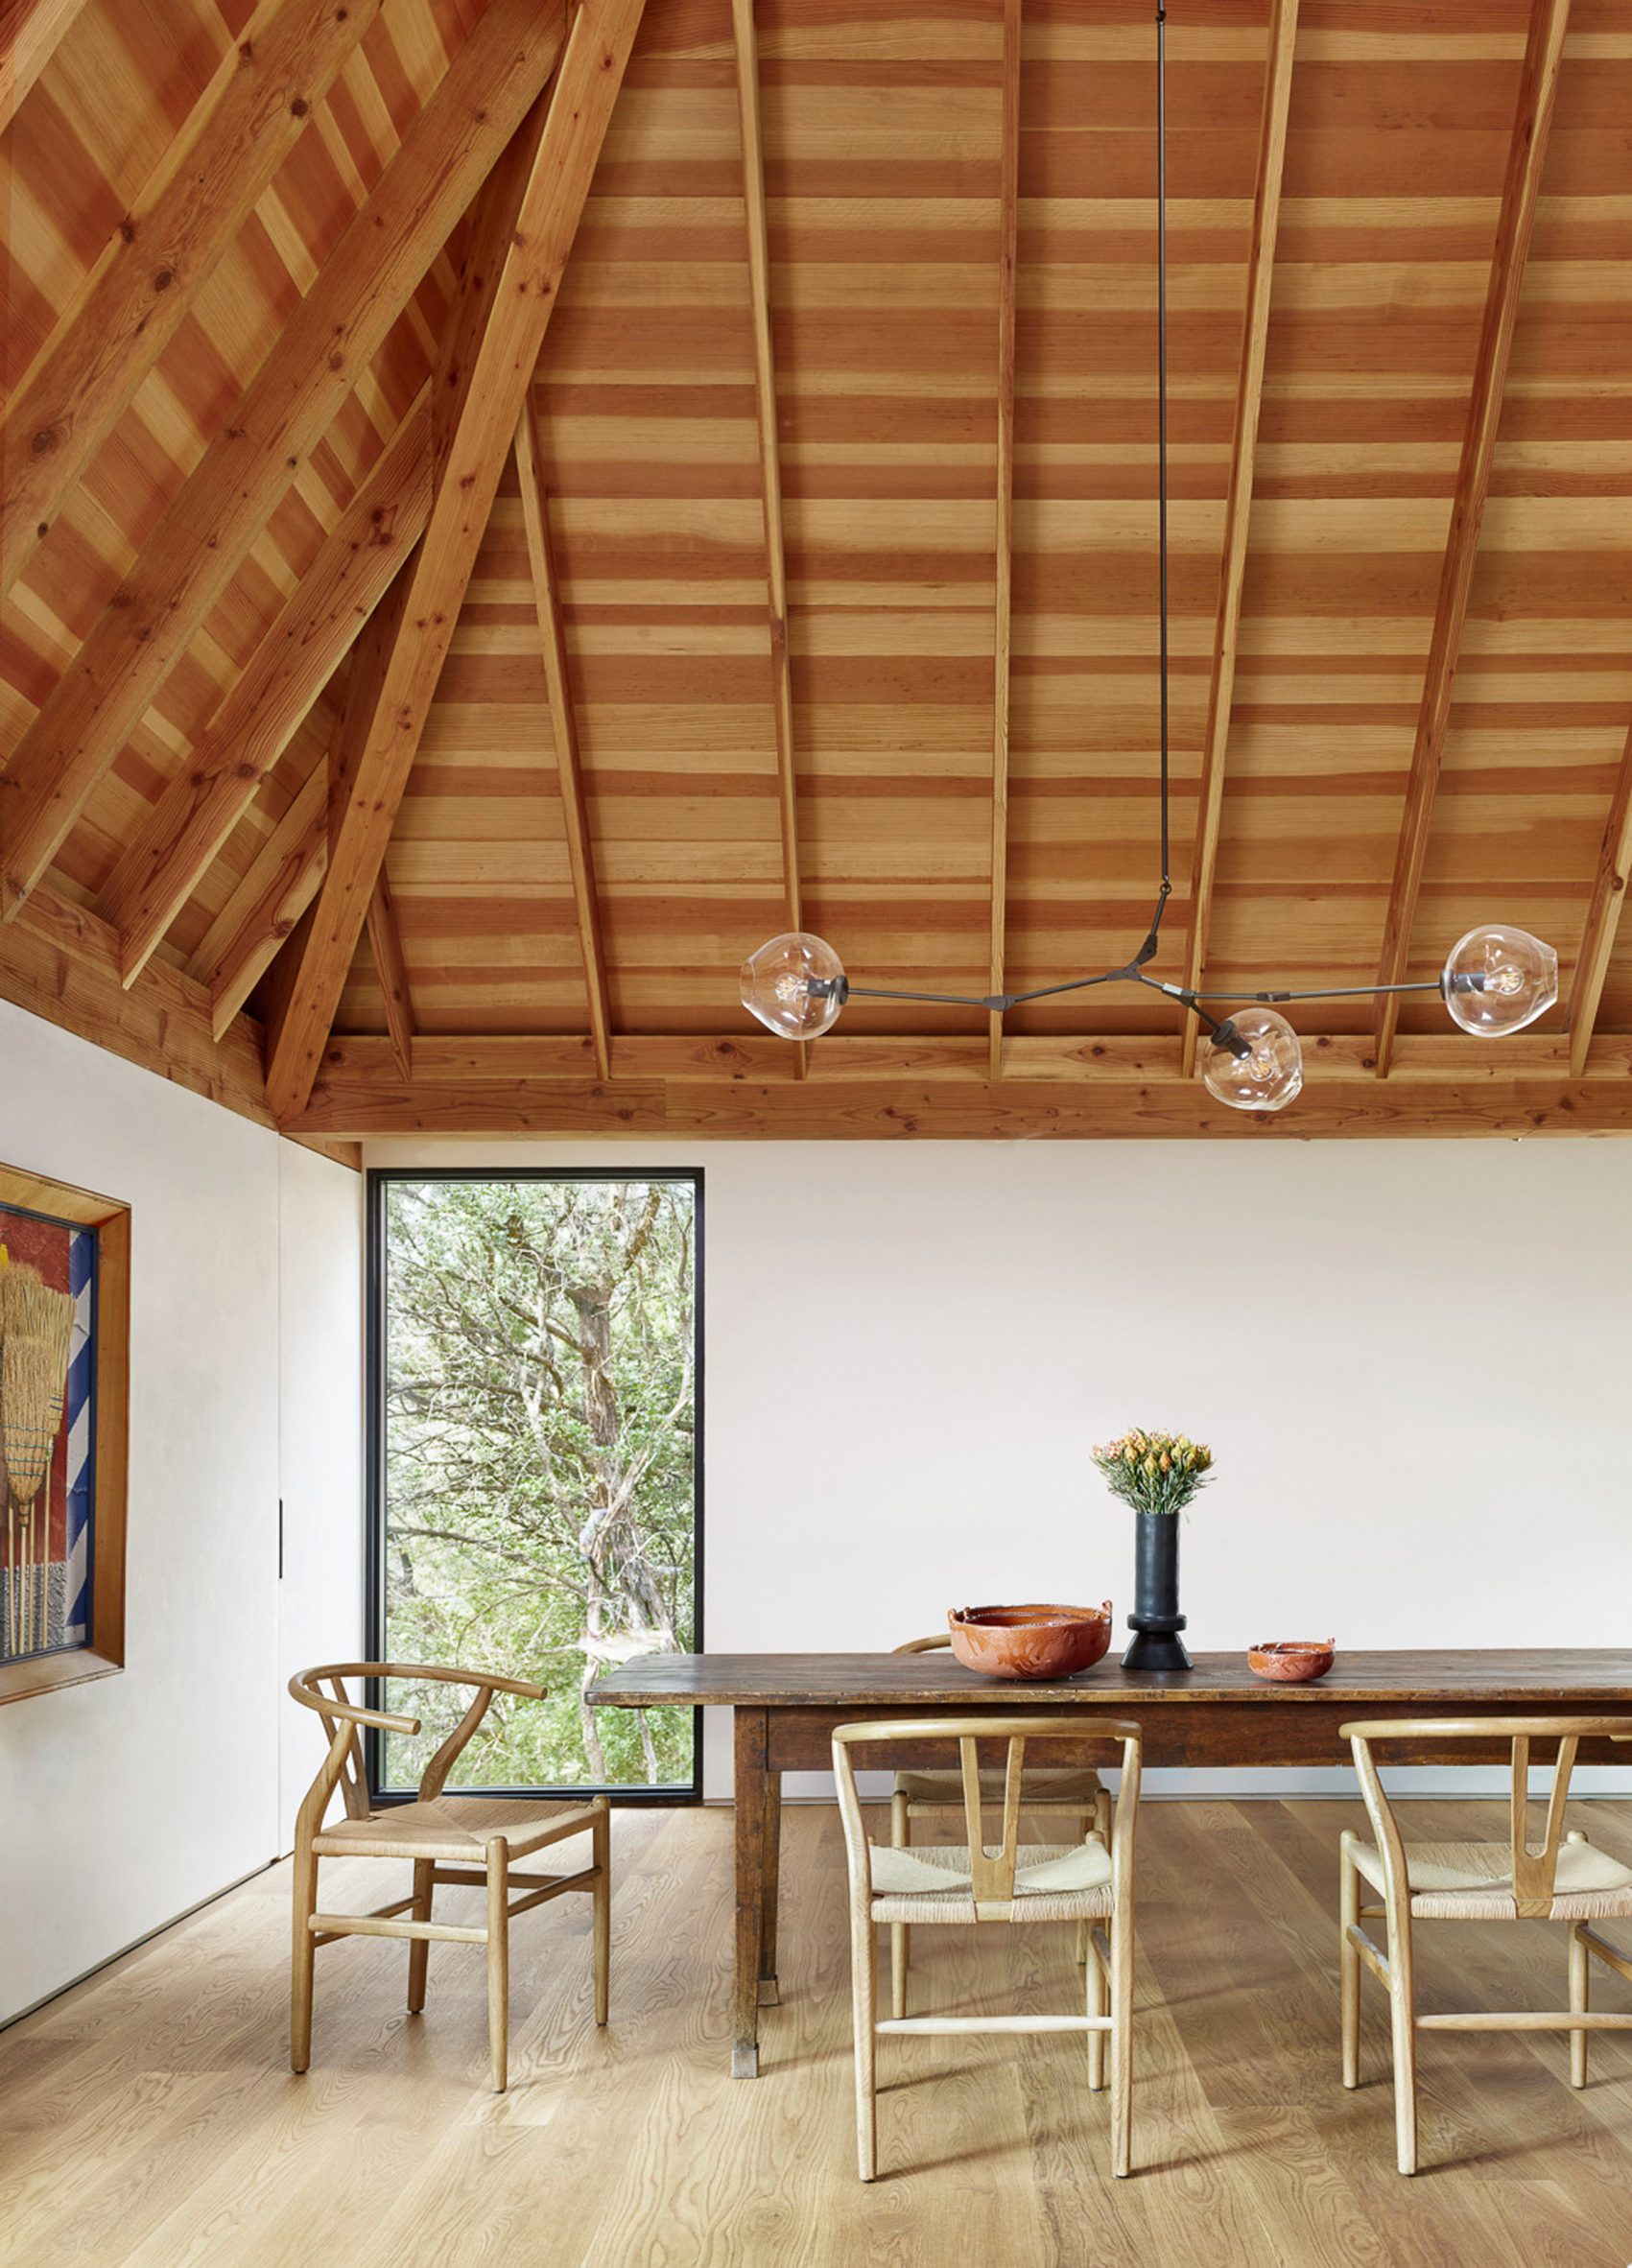 Timber-clad pyramidal roof in the dining space